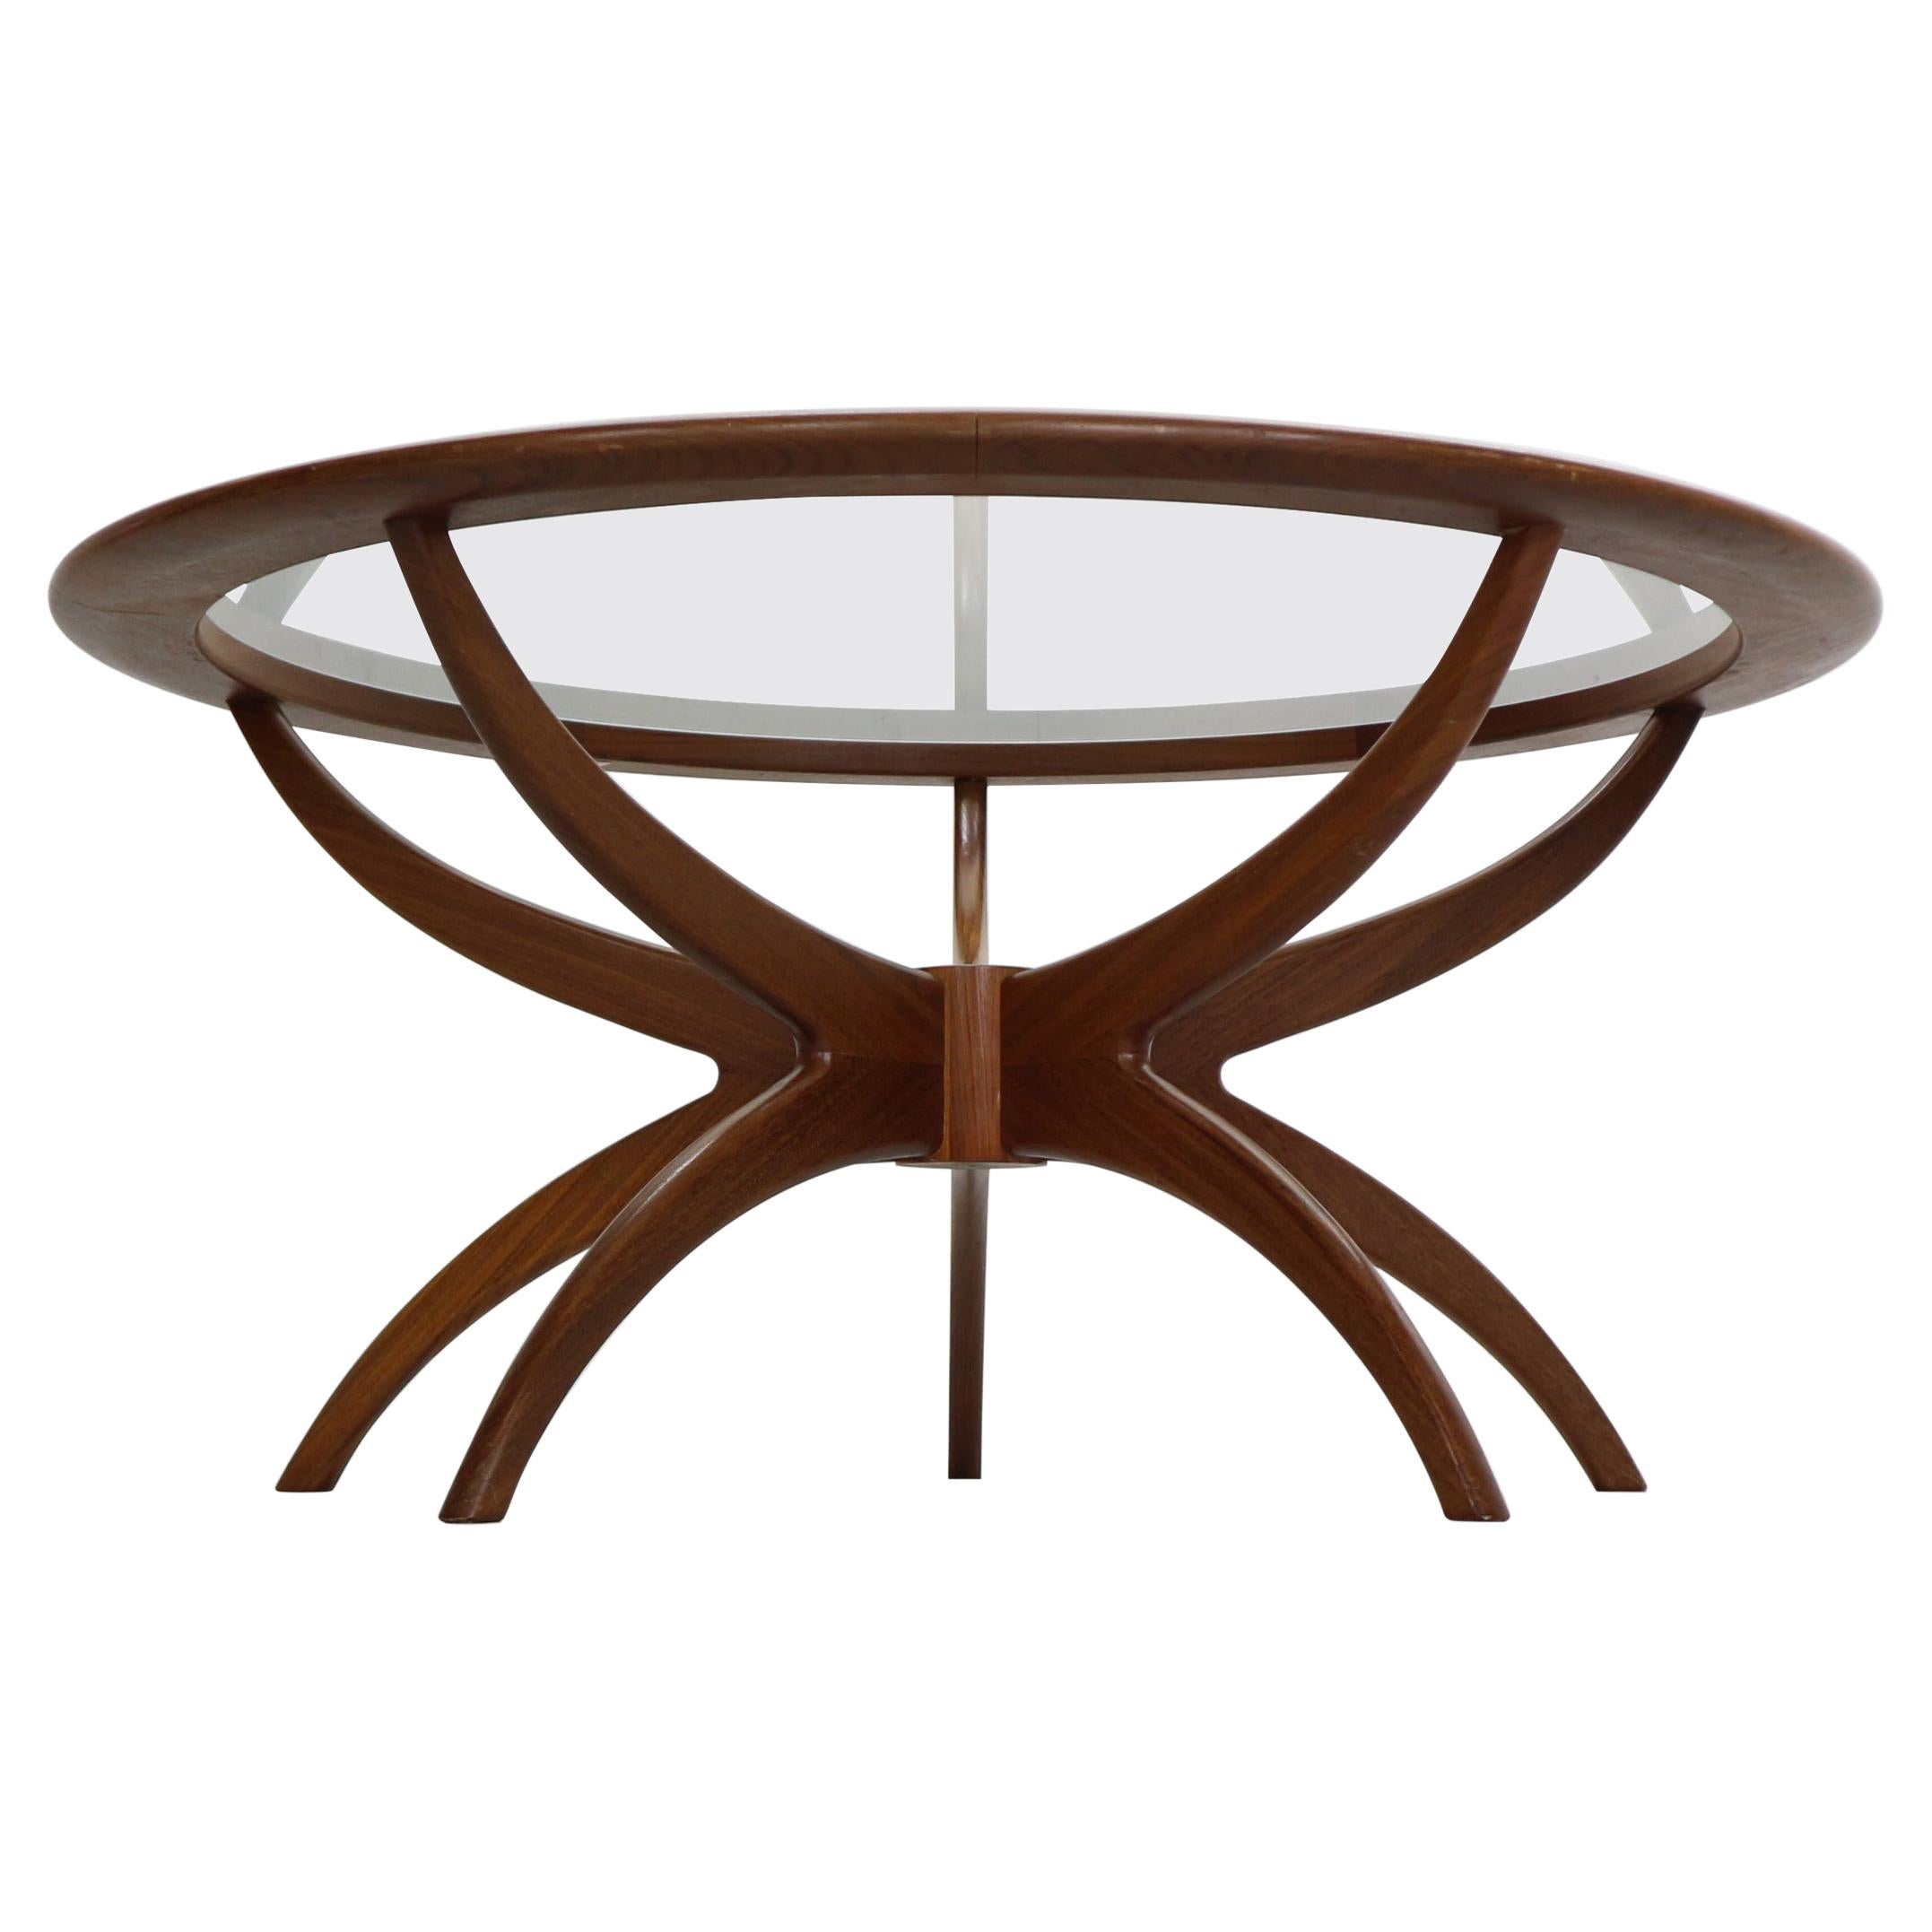 G-Plan Teak "Astro/Spider" Coffee Table by Victor Wilkins, 1960's England